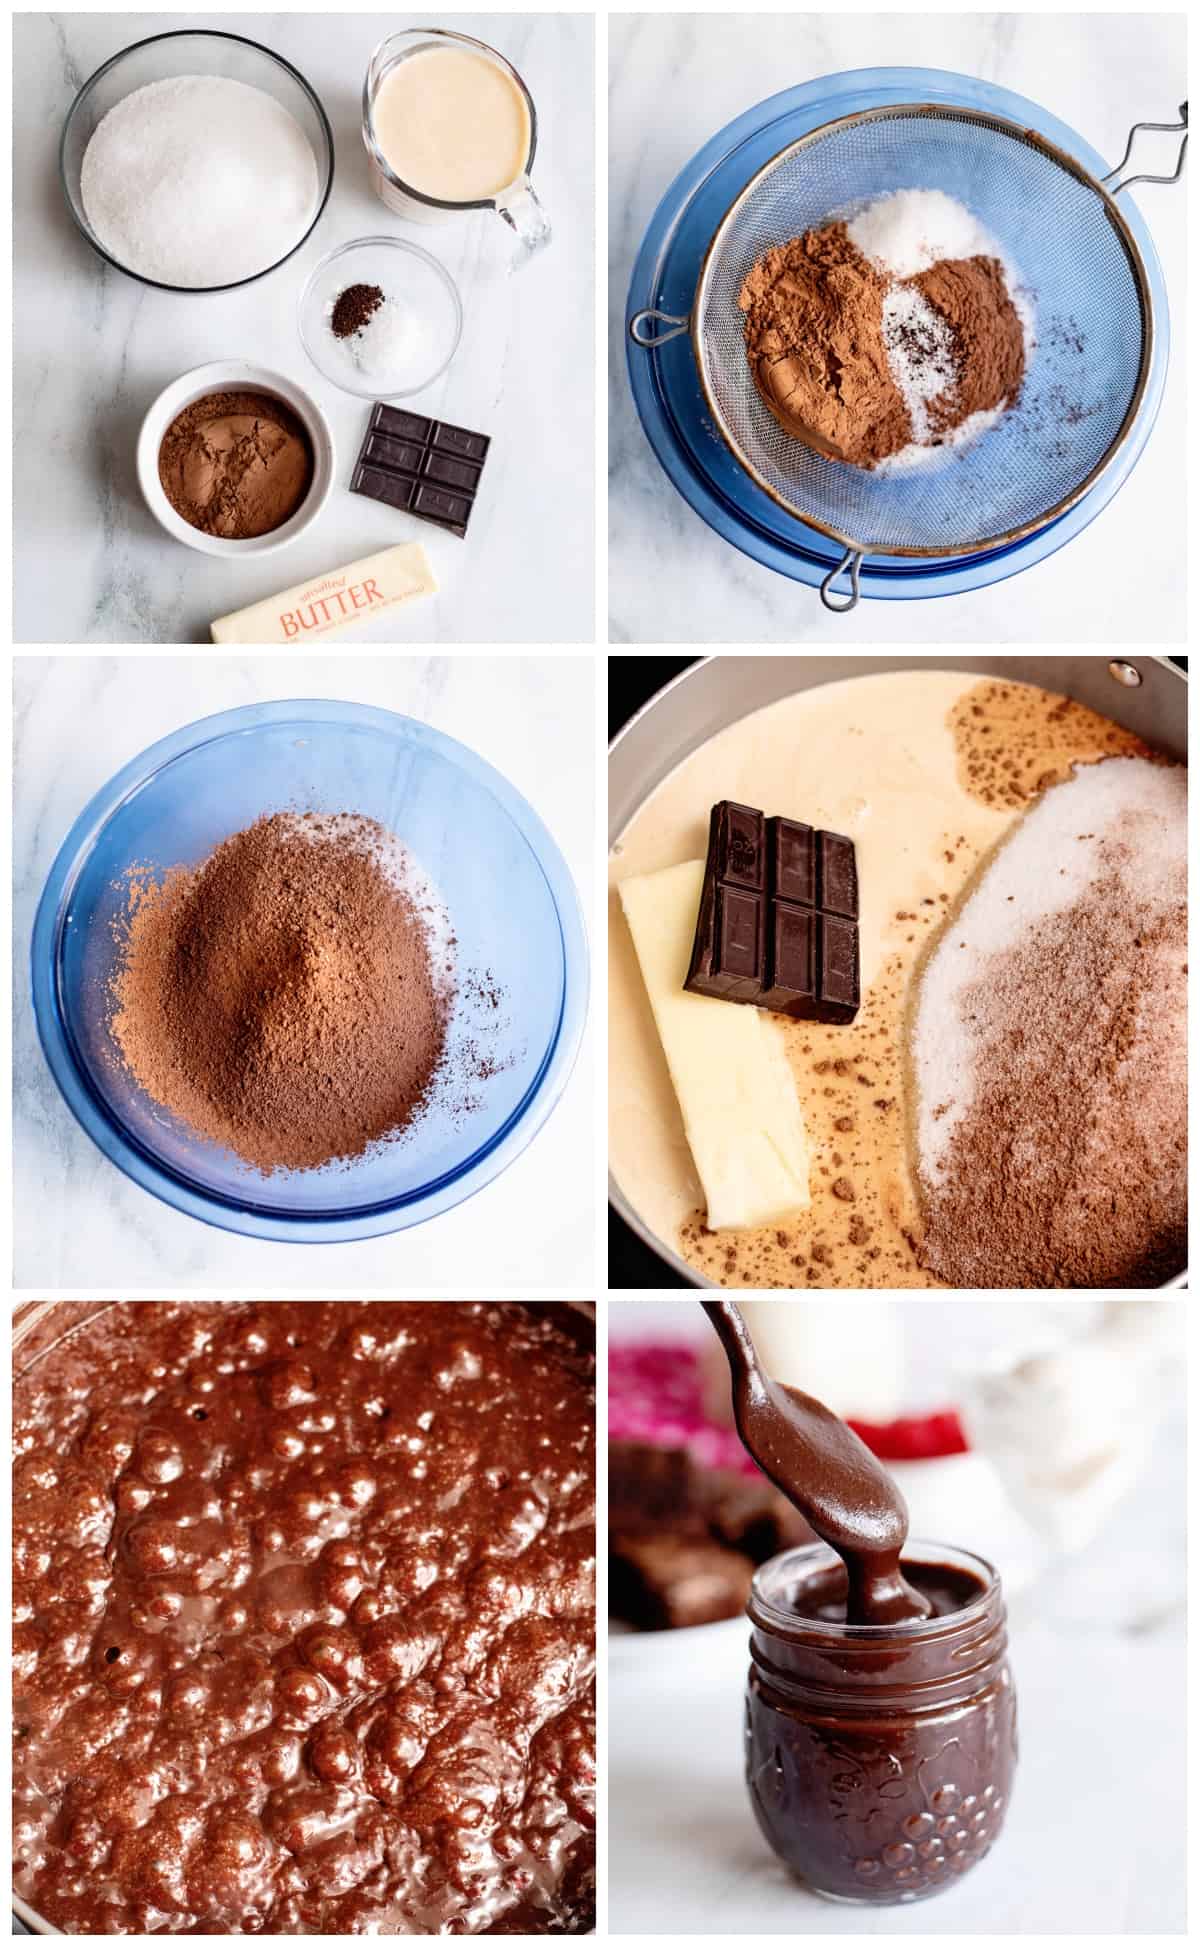 step by step photos showing how to make hot fudge sauce